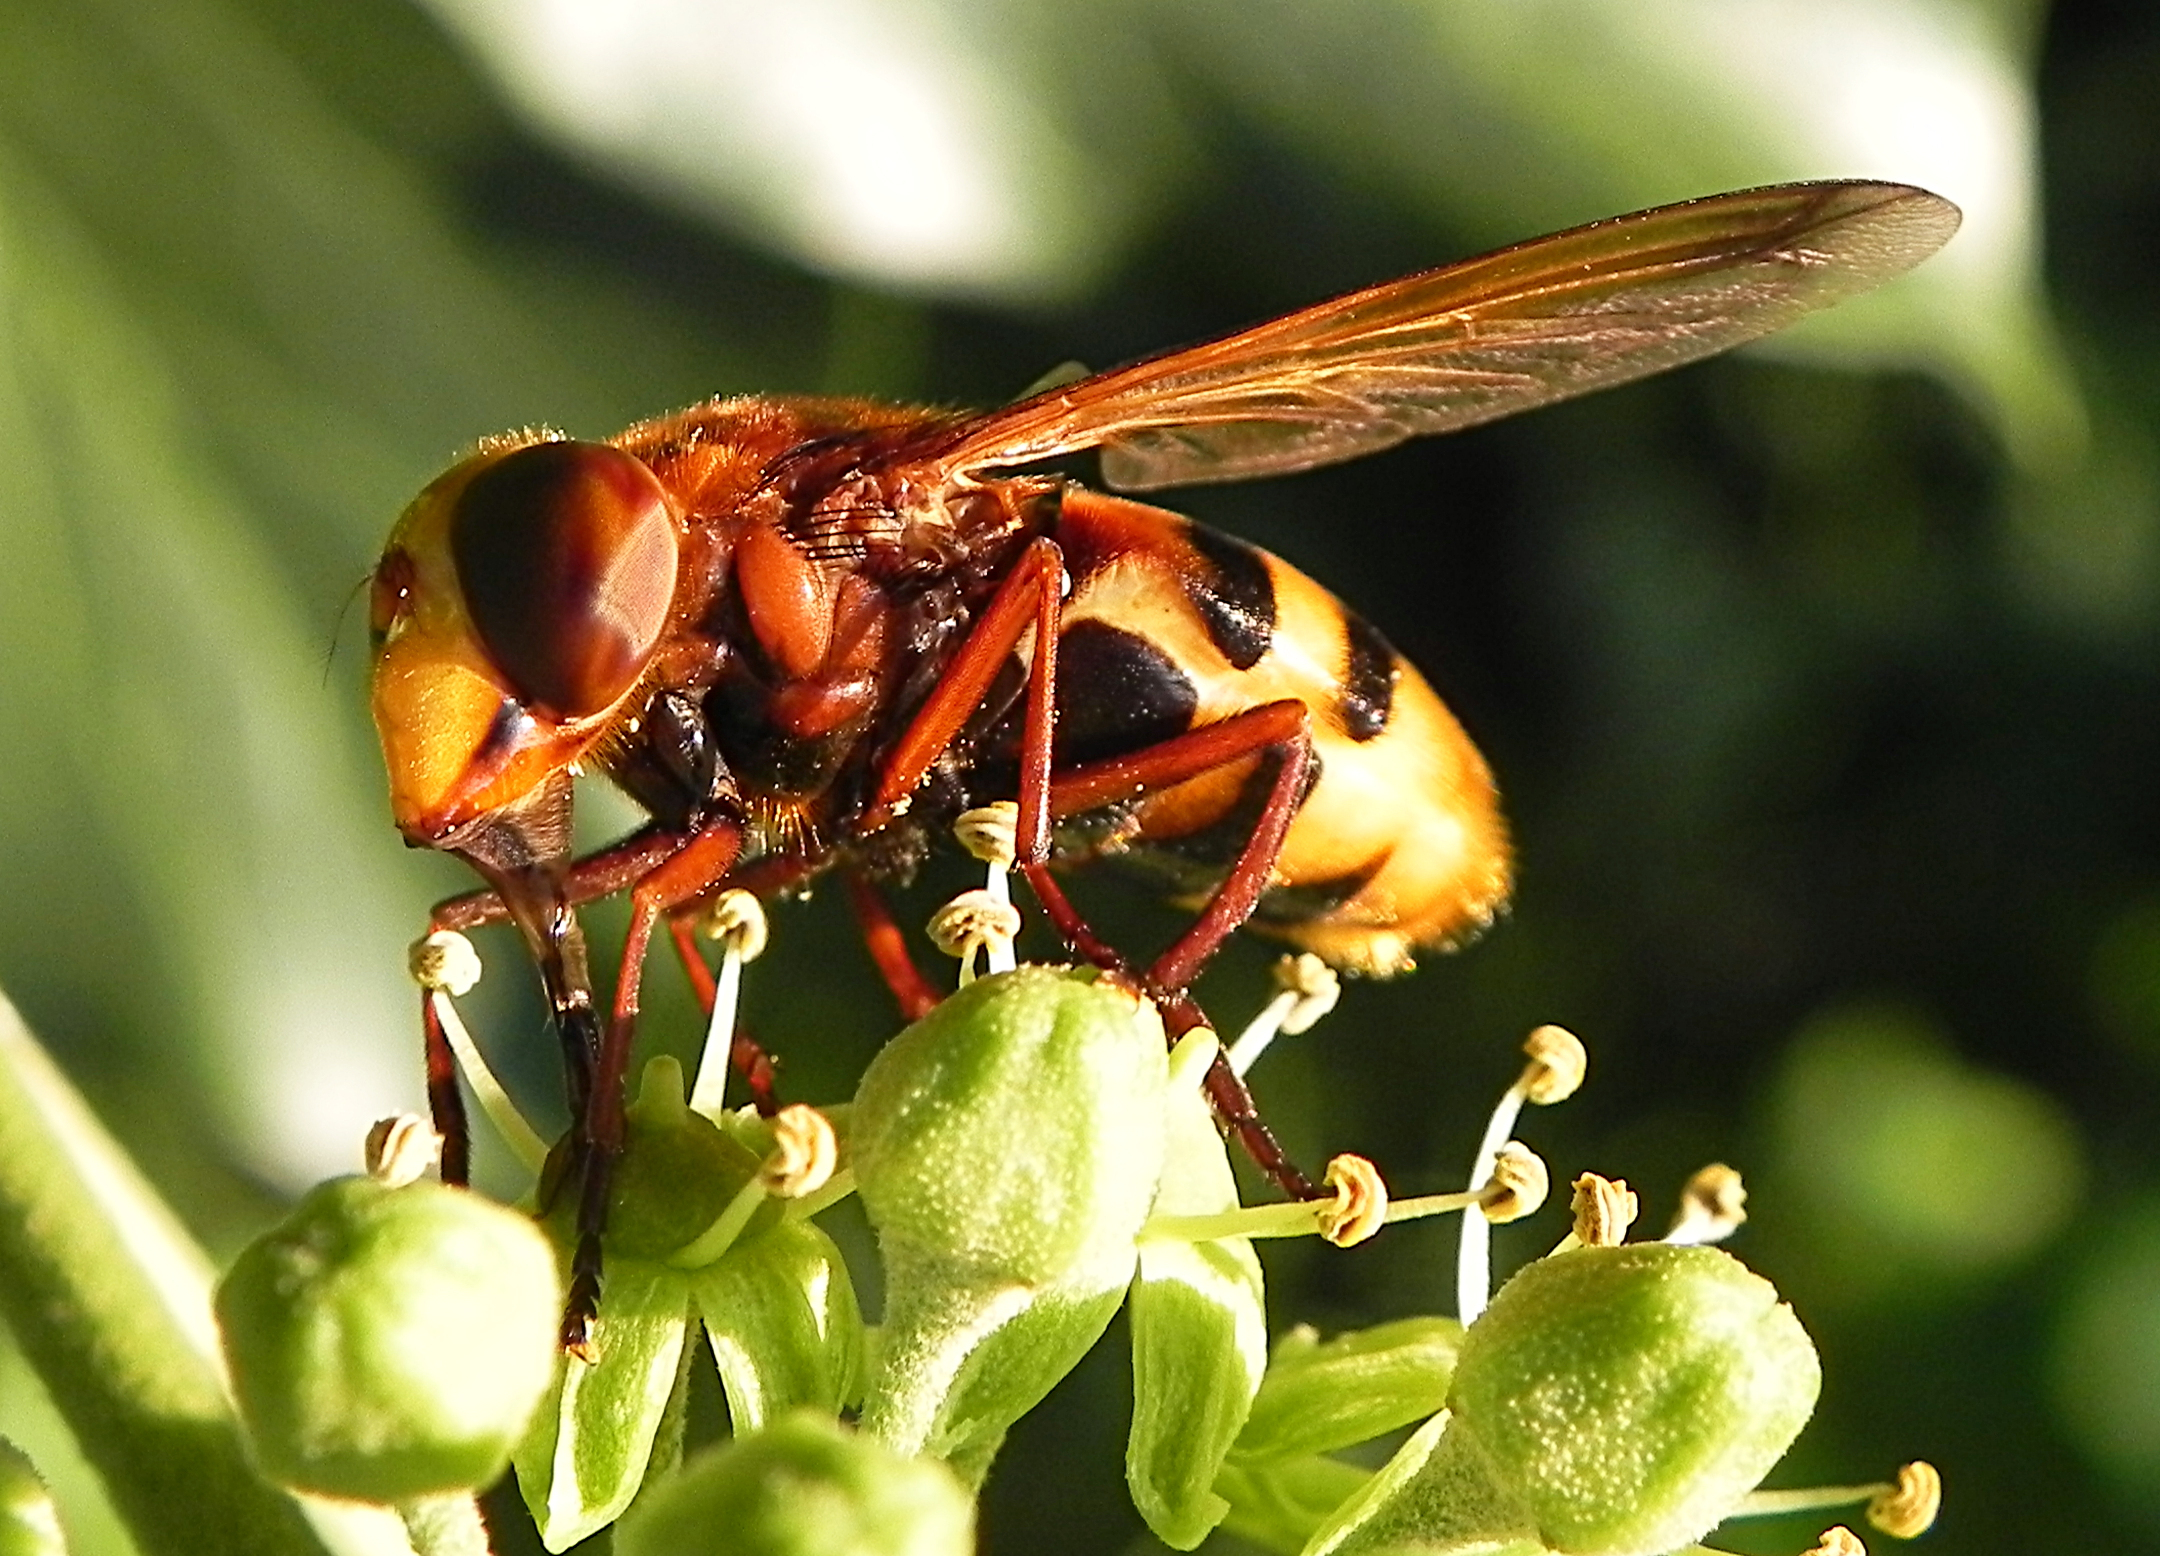 Fam. Syrphidae, Italia, Brescia, 23 Aug 2014. Provided by Paolo to children for didactics, but not shot with them.